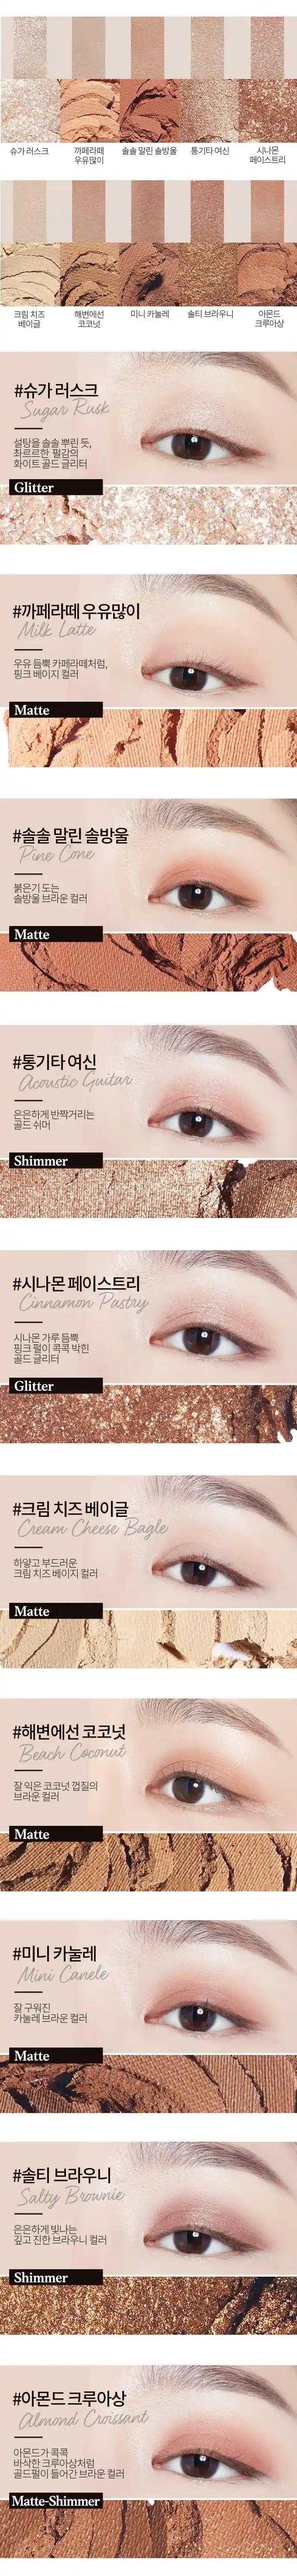 ETUDE HOUSE PLAY COLOR EYES BAKE HOUSE EmpressKorea ETUDE HOUSE PLAY COLOR EYES # BAKE HOUSE *Point 1 Warm brown color shadeC...